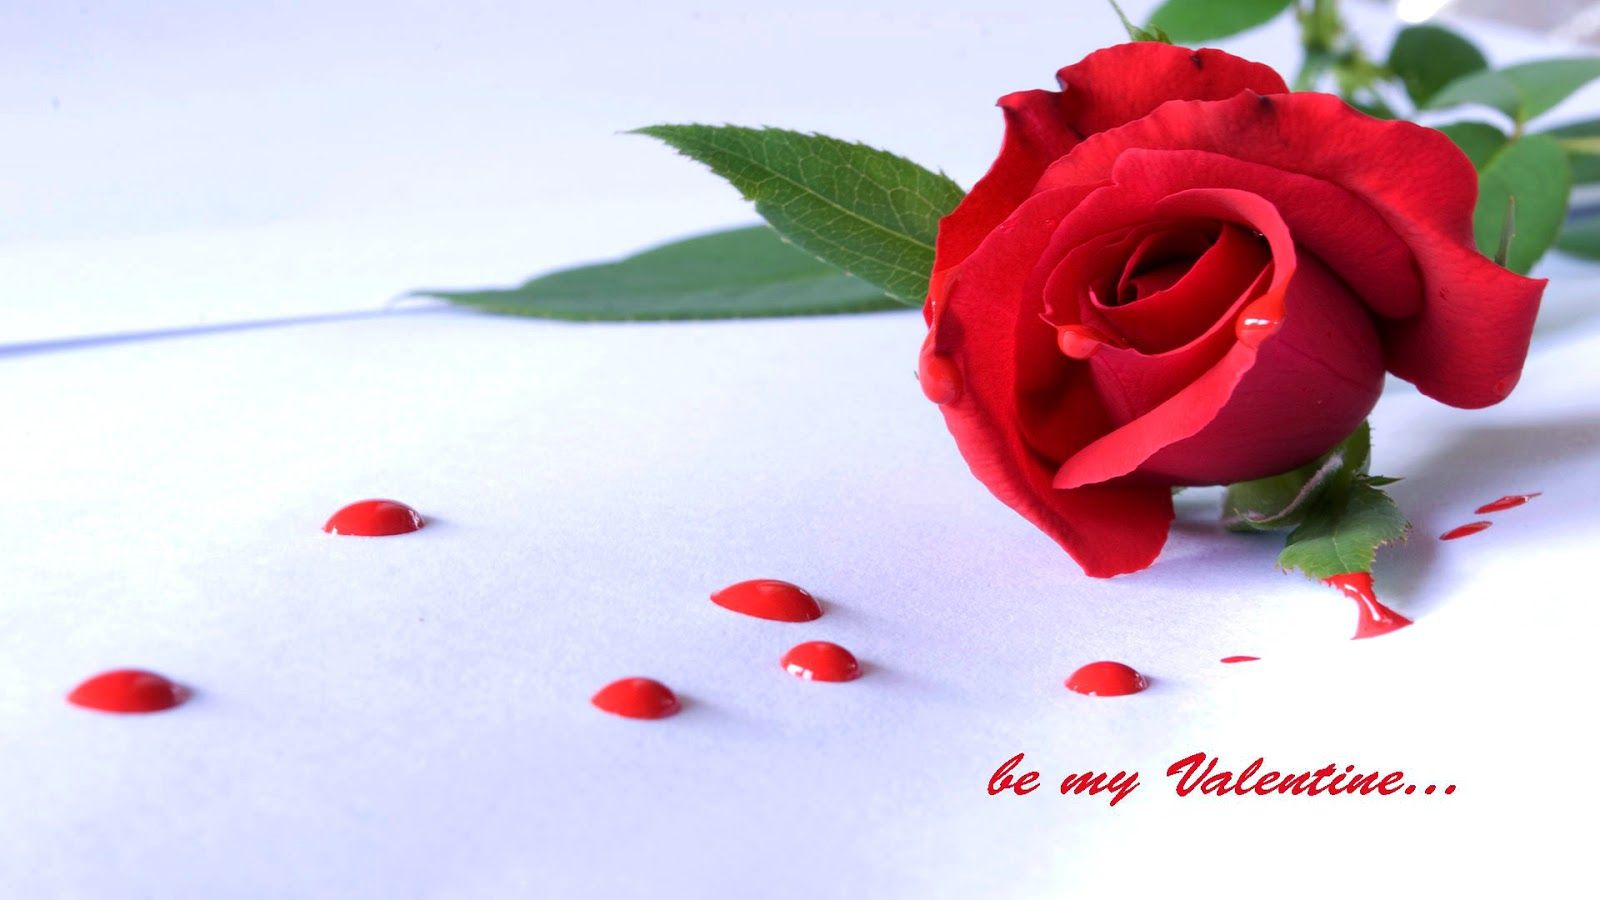 Rose Valentines Day Romantic Background Wallpapers 